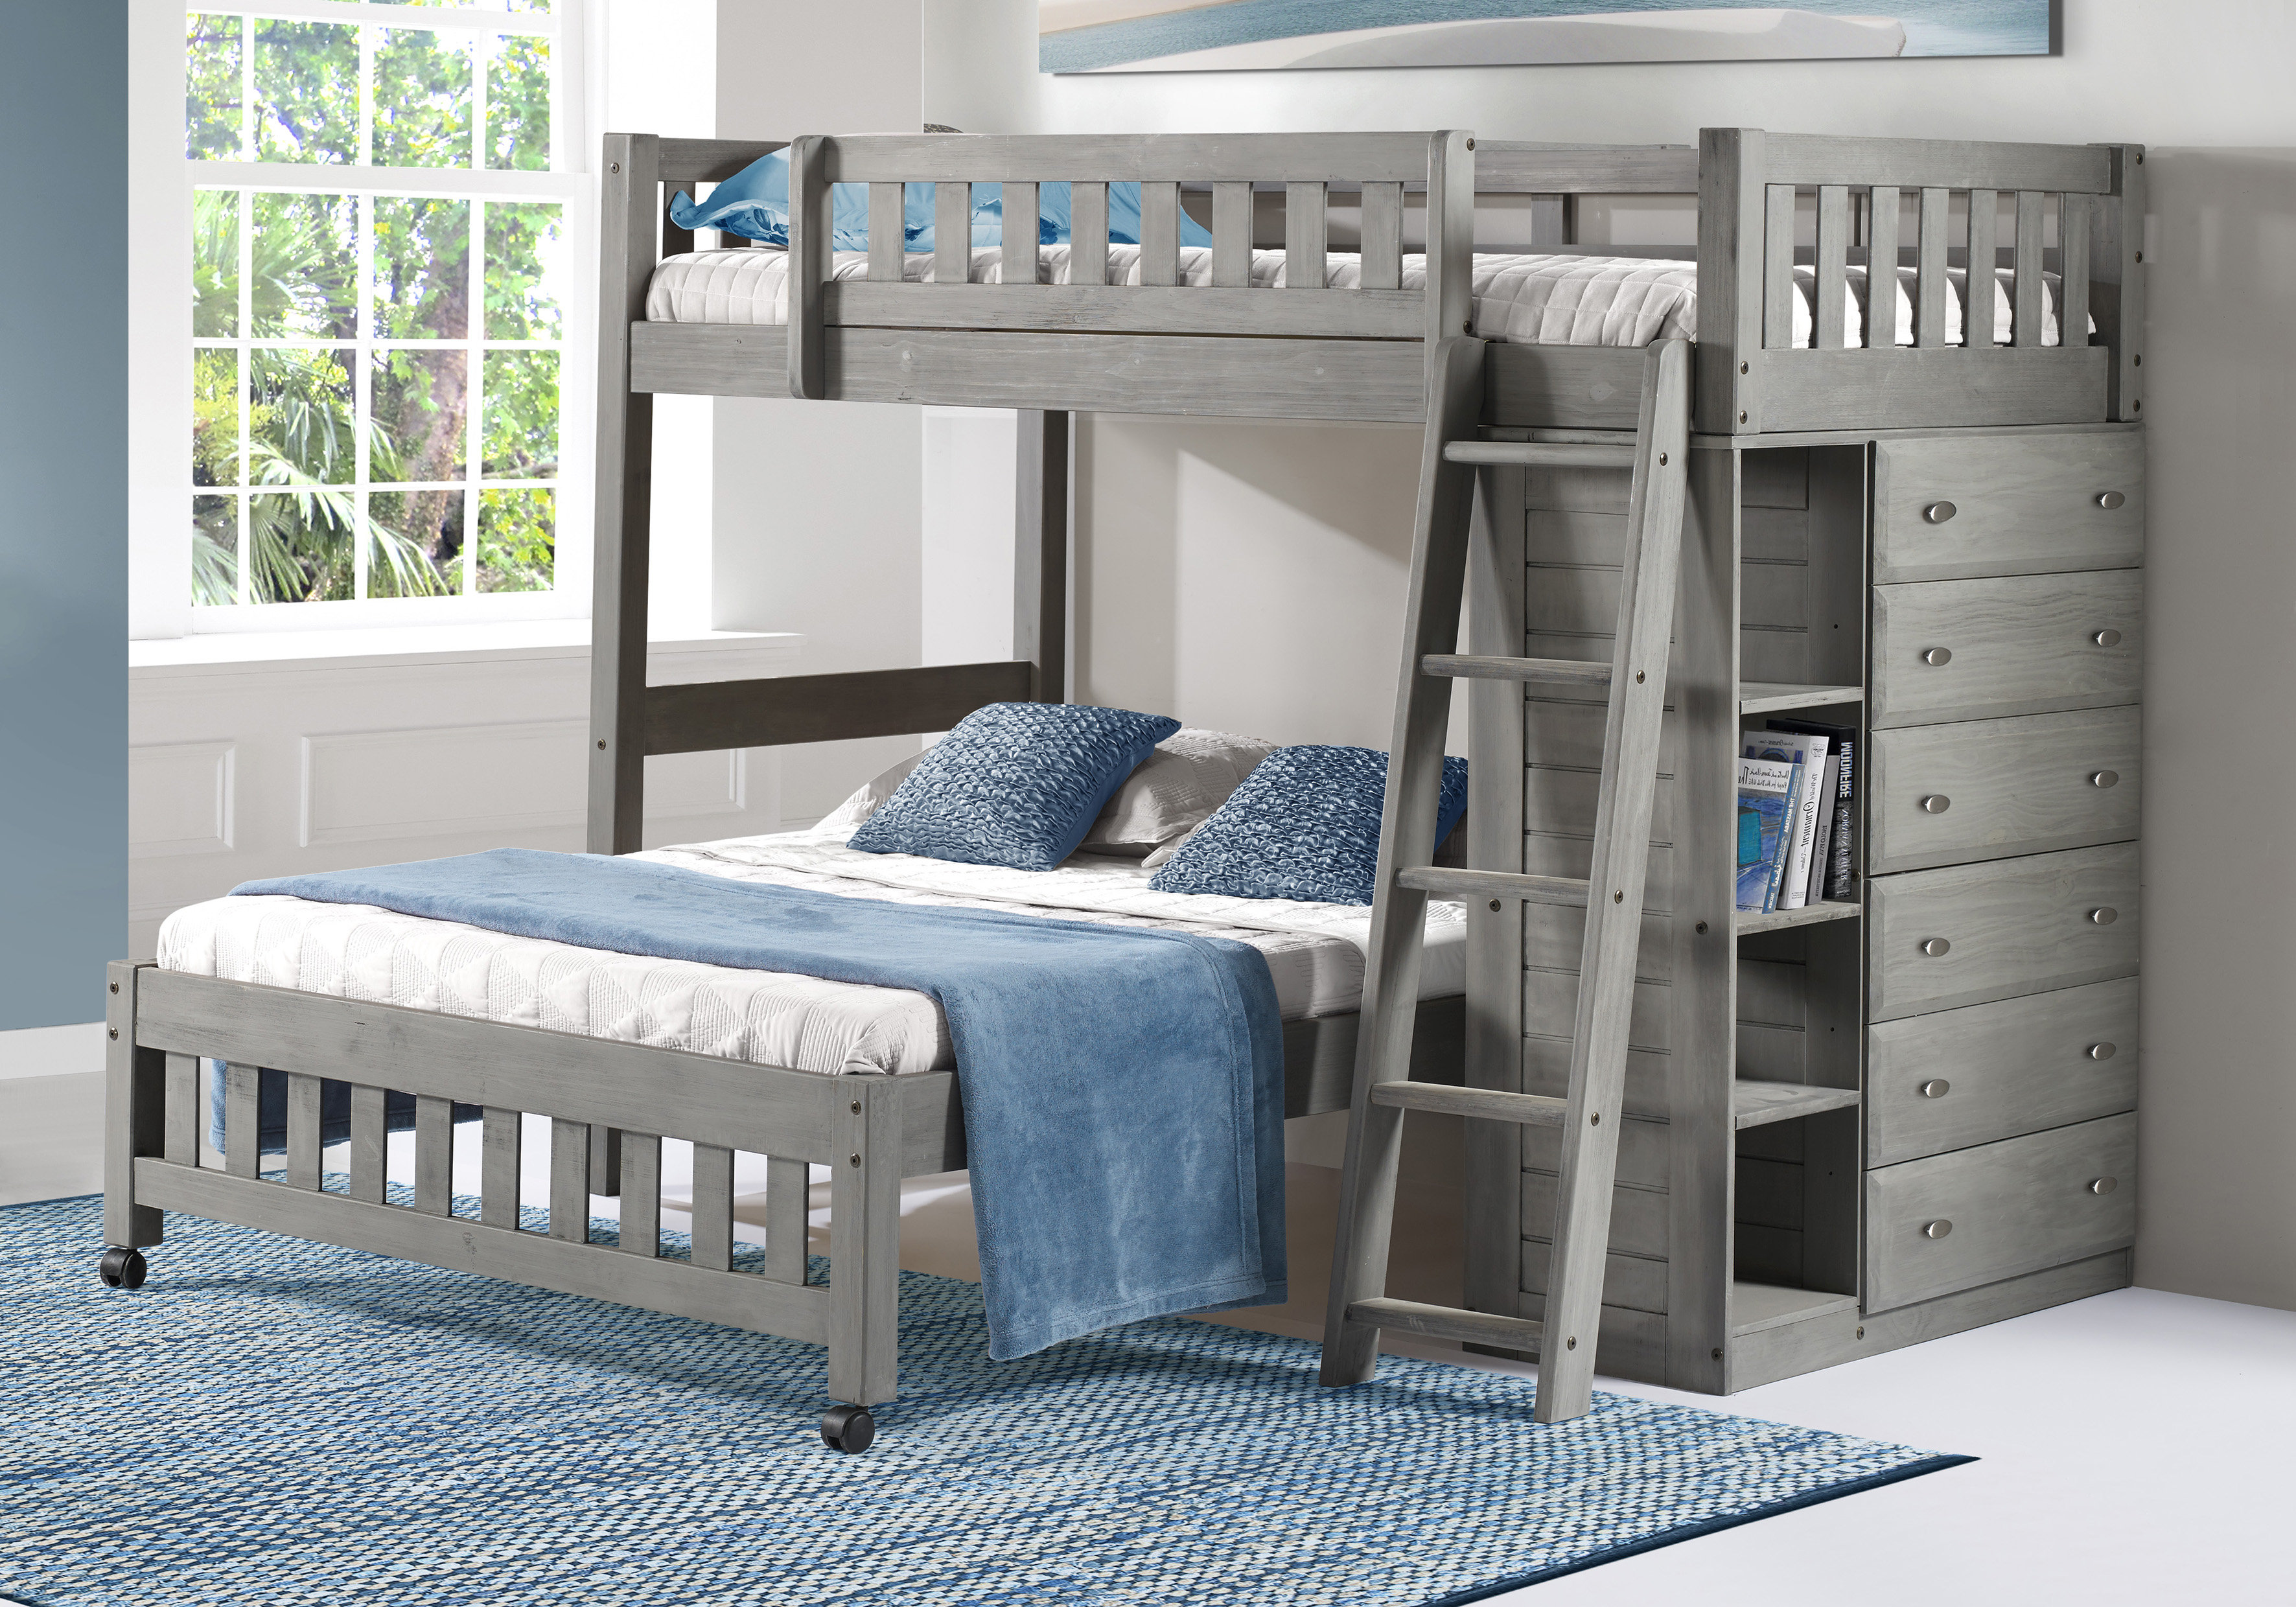 aranza-twin-over-full-l-shaped-bunk-bed-with-drawers-and-shelves.jpg